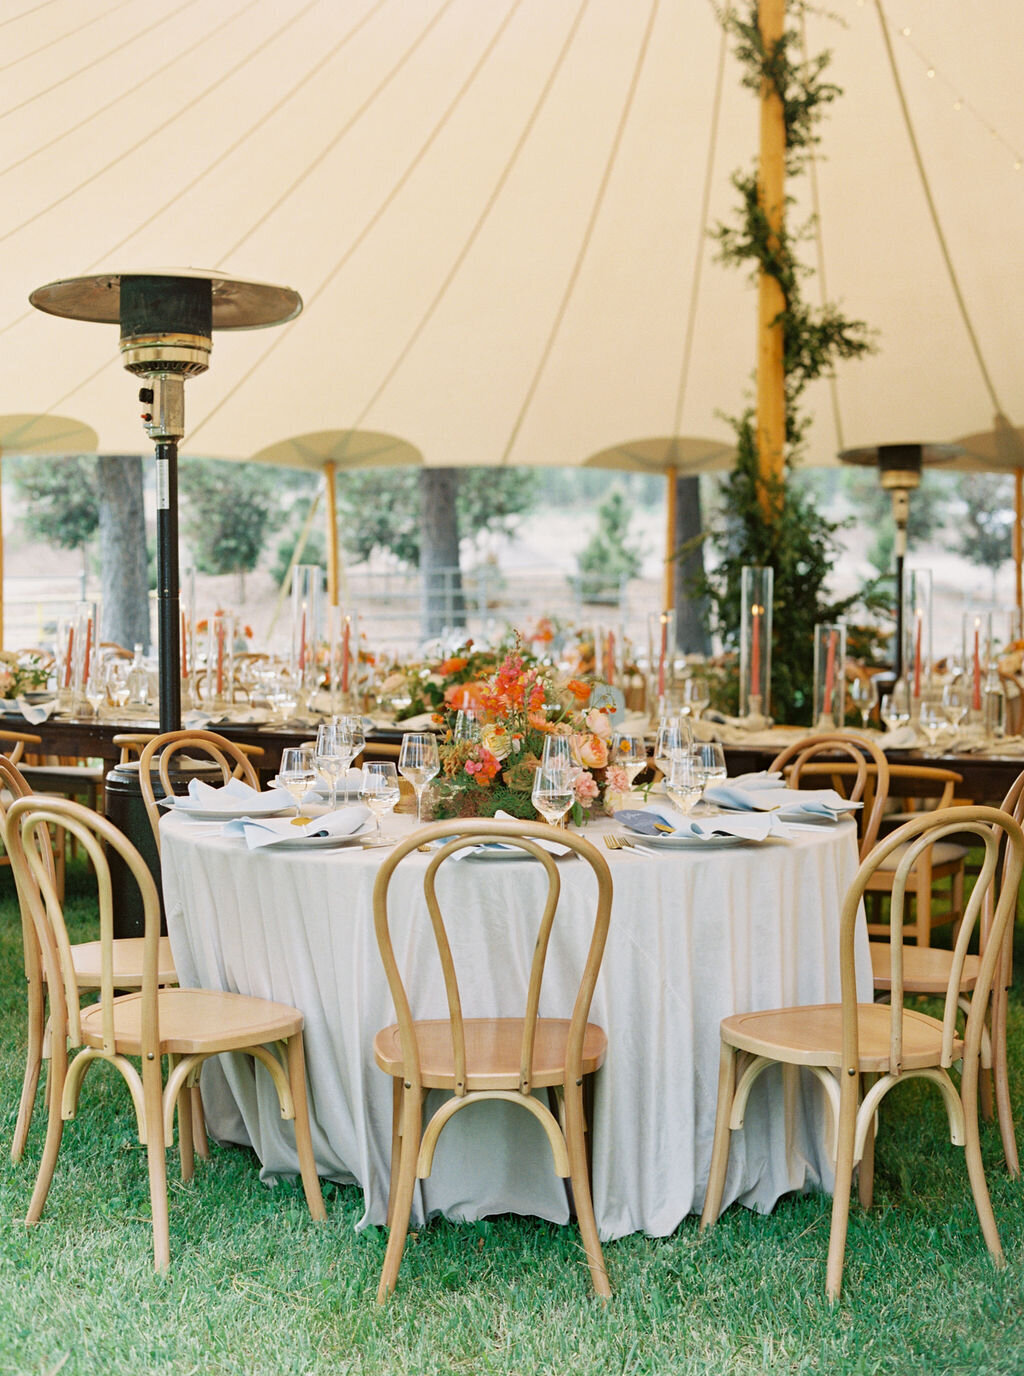 Wedding Reception Table with Wood Chairs